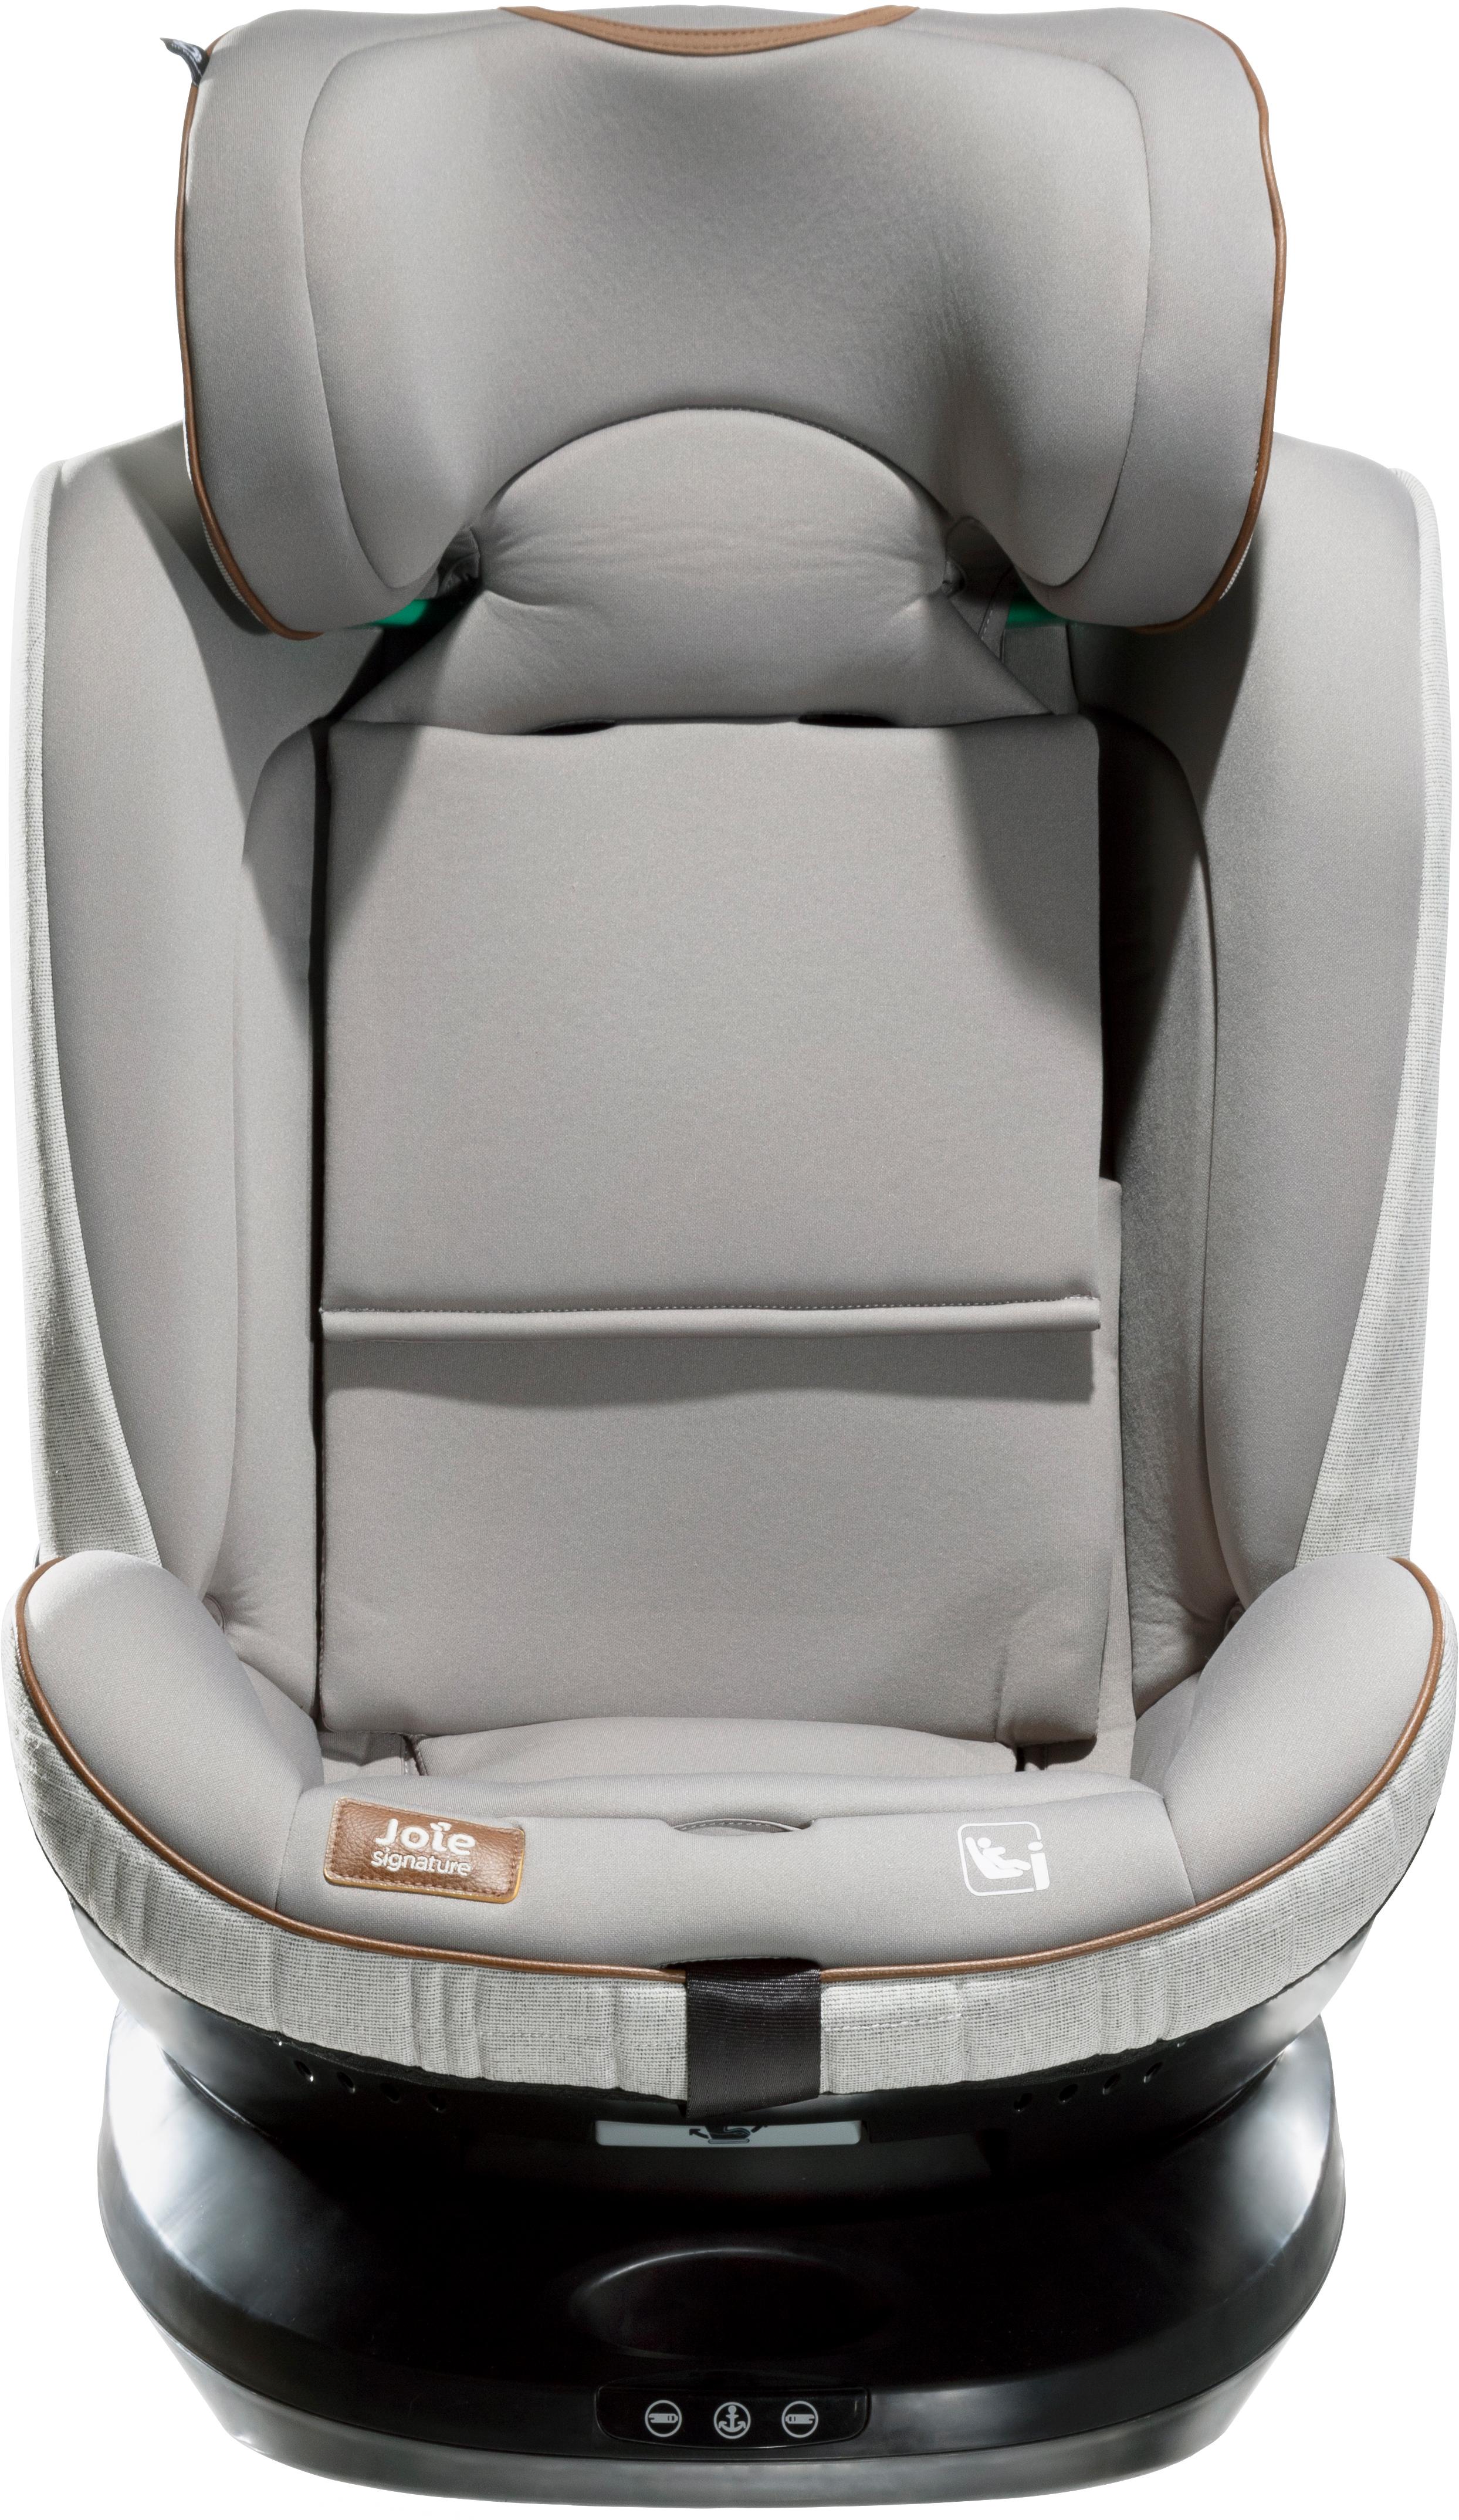 Joie I-Spin Grow Group 0+/1/2 Car Seat - Oyster